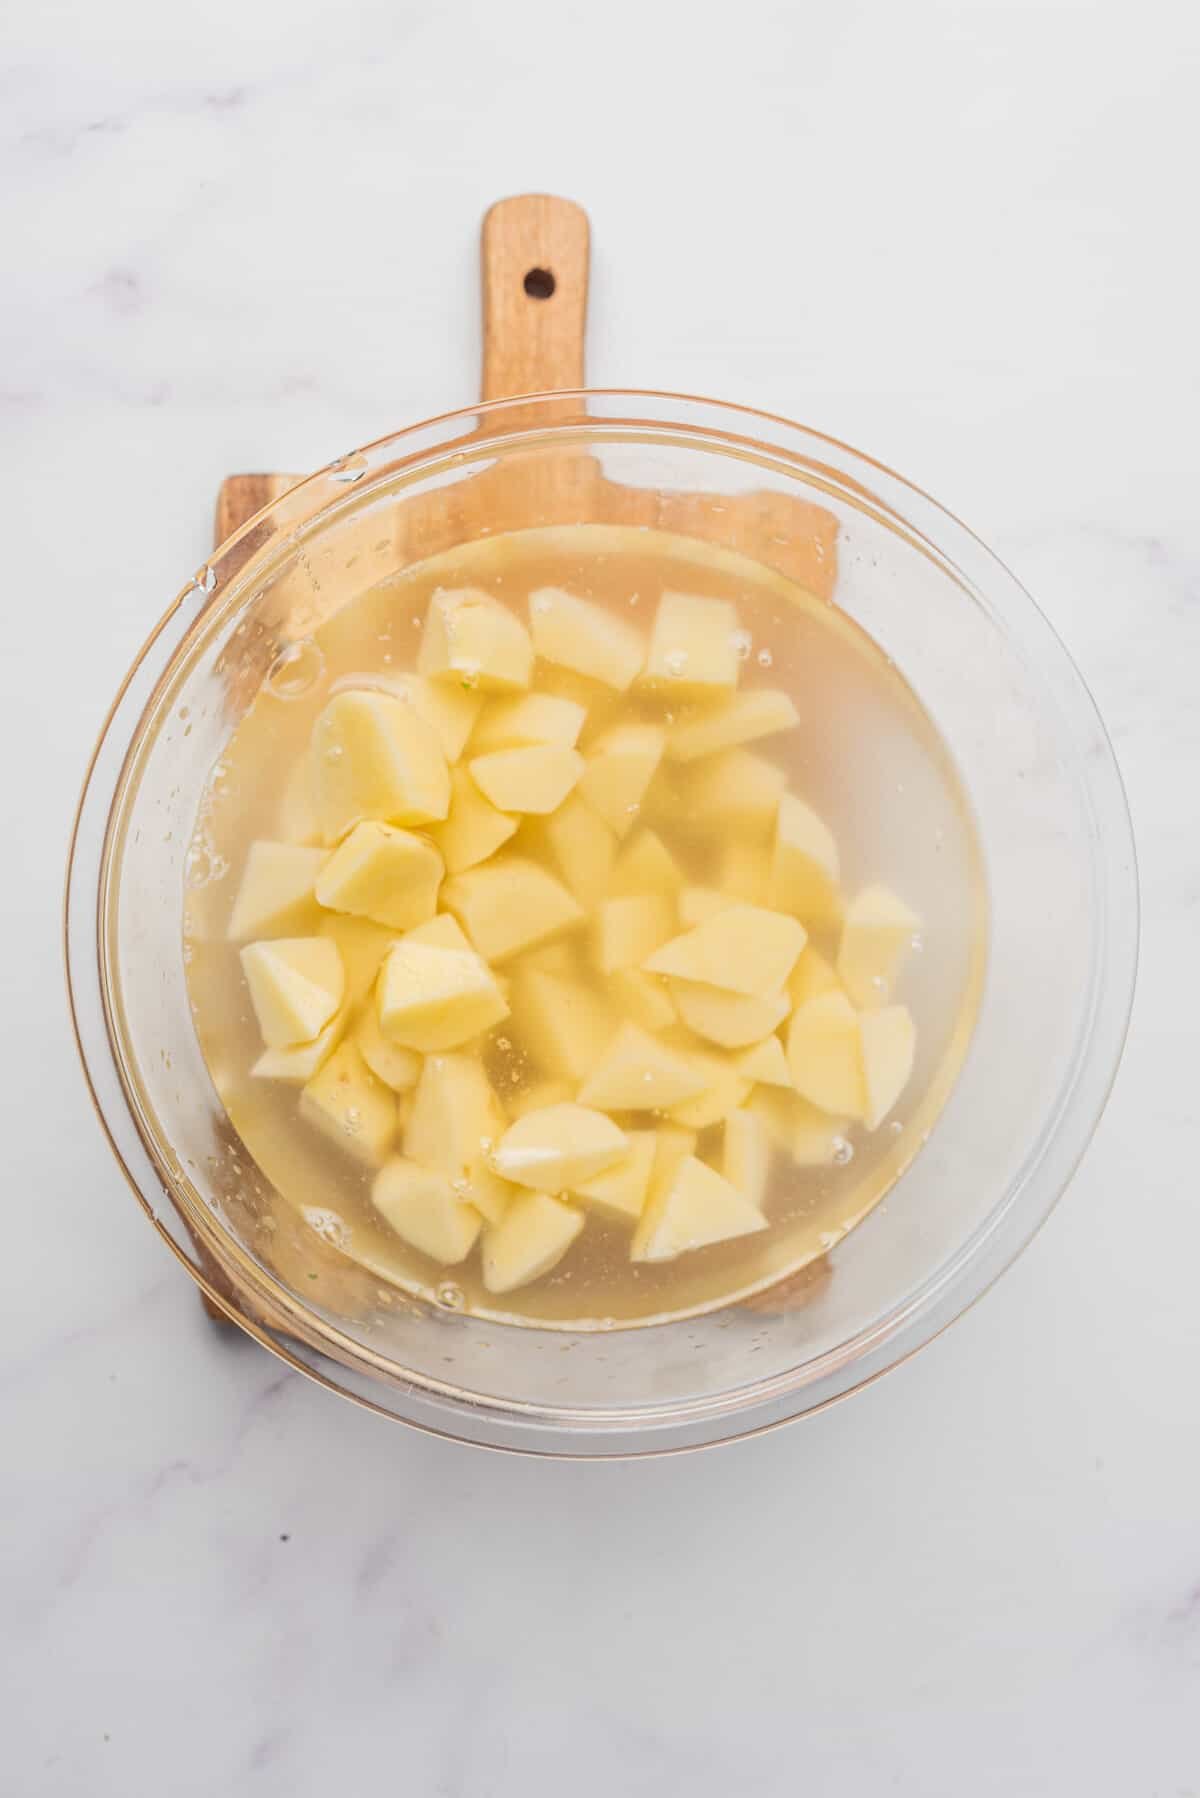 An overhead image of potato cubes in a bowl.